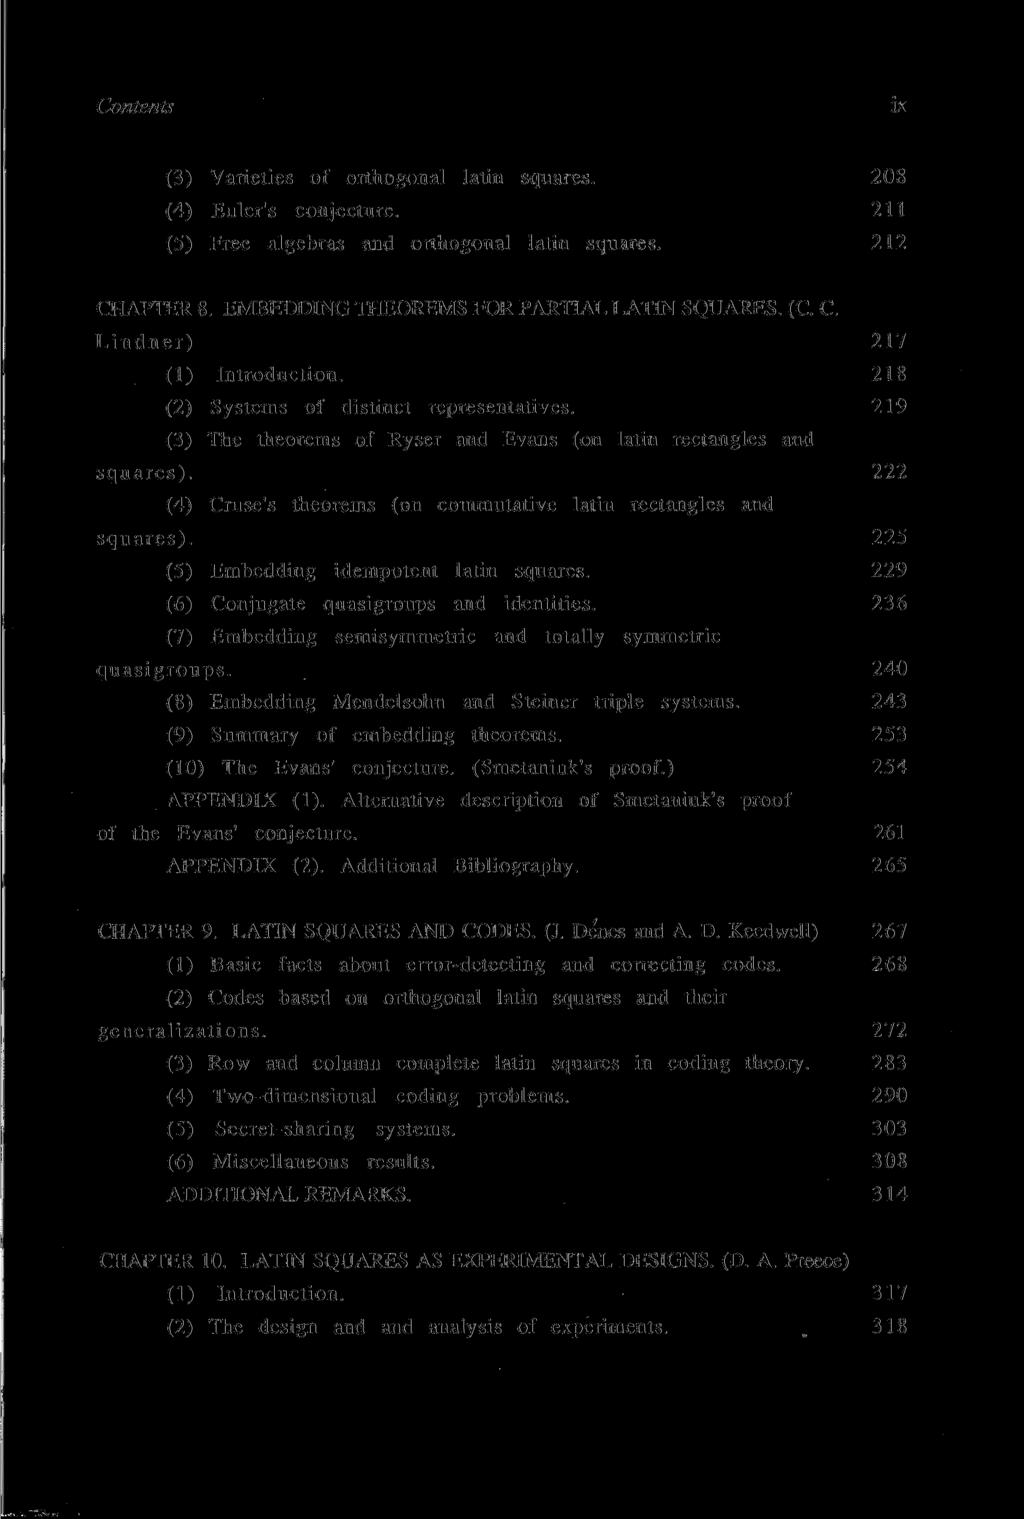 Contents ix (3) Varieties of orthogonal latin squares. 208 (4) Euler's conjecture. 211 (5) Free algebras and orthogonal latin squares. 212 CHAPTER 8. EMBEDDING THEOREMS FOR PARTIAL LATIN SQUARES. (С.